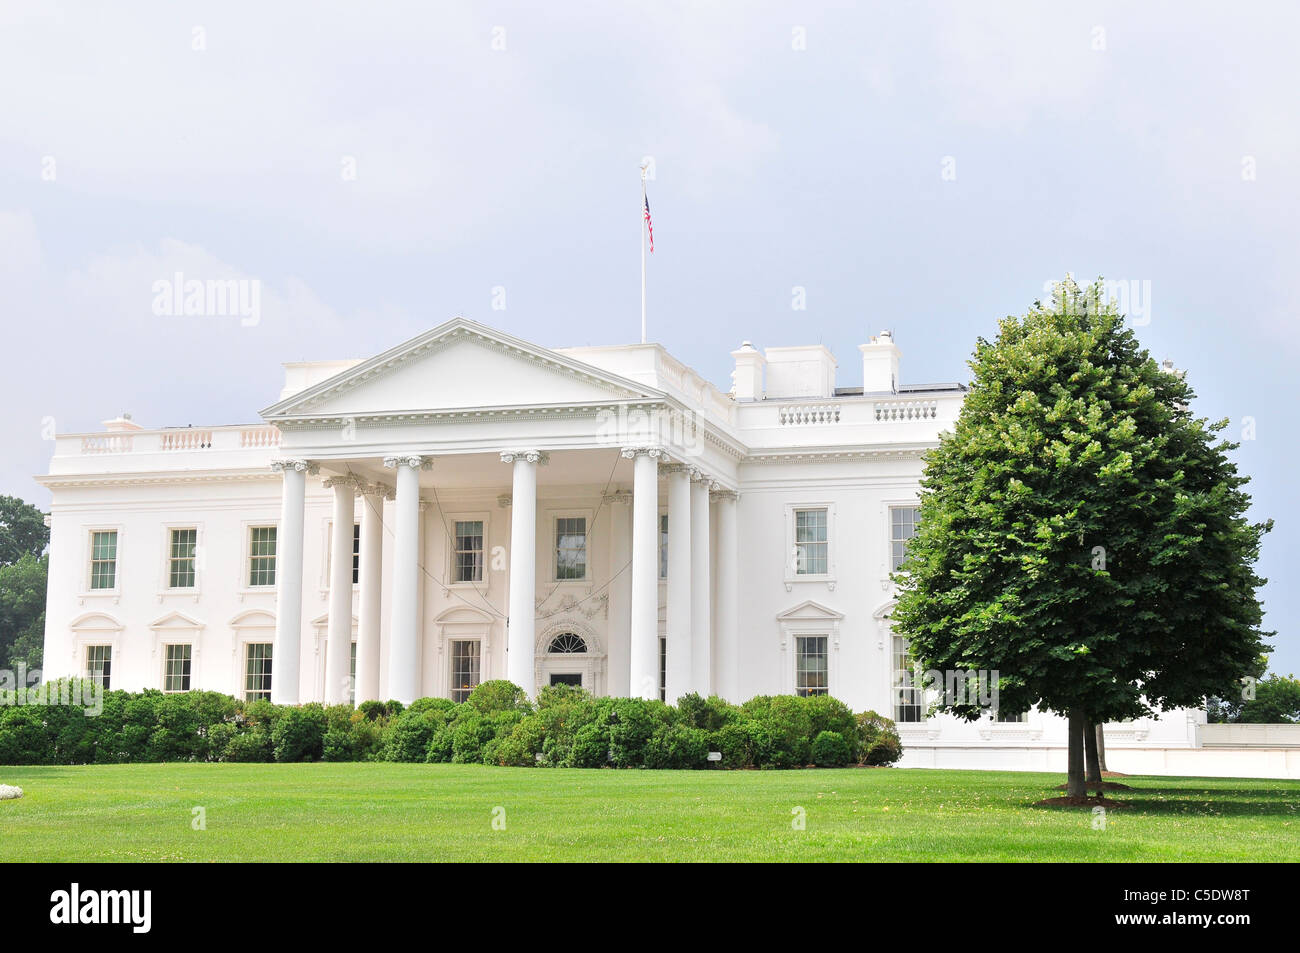 The White House is the official residence and principal workplace of the President of the United States. Stock Photo